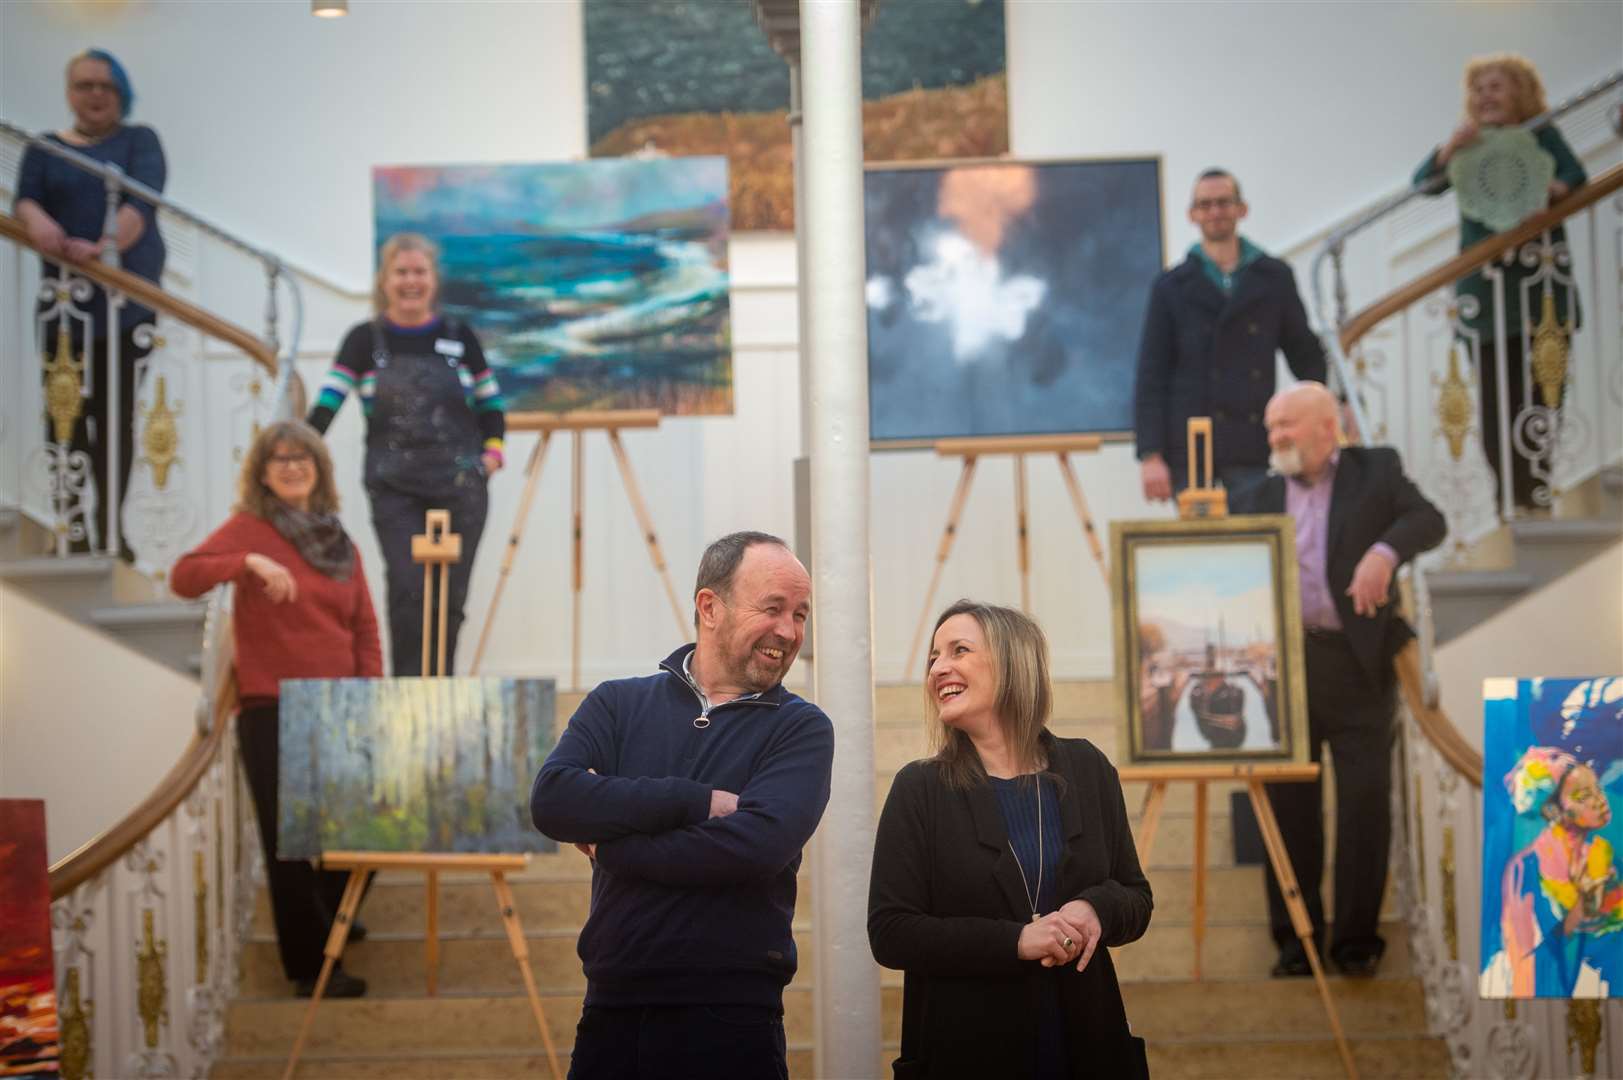 The first tenants to move into the new building, Professor Donald Maclean and former BBC Producer Kate Hooper of StrategyStory are joined by some of the artists working in the first phase to mark the official opening of Inverness Creative Hub.